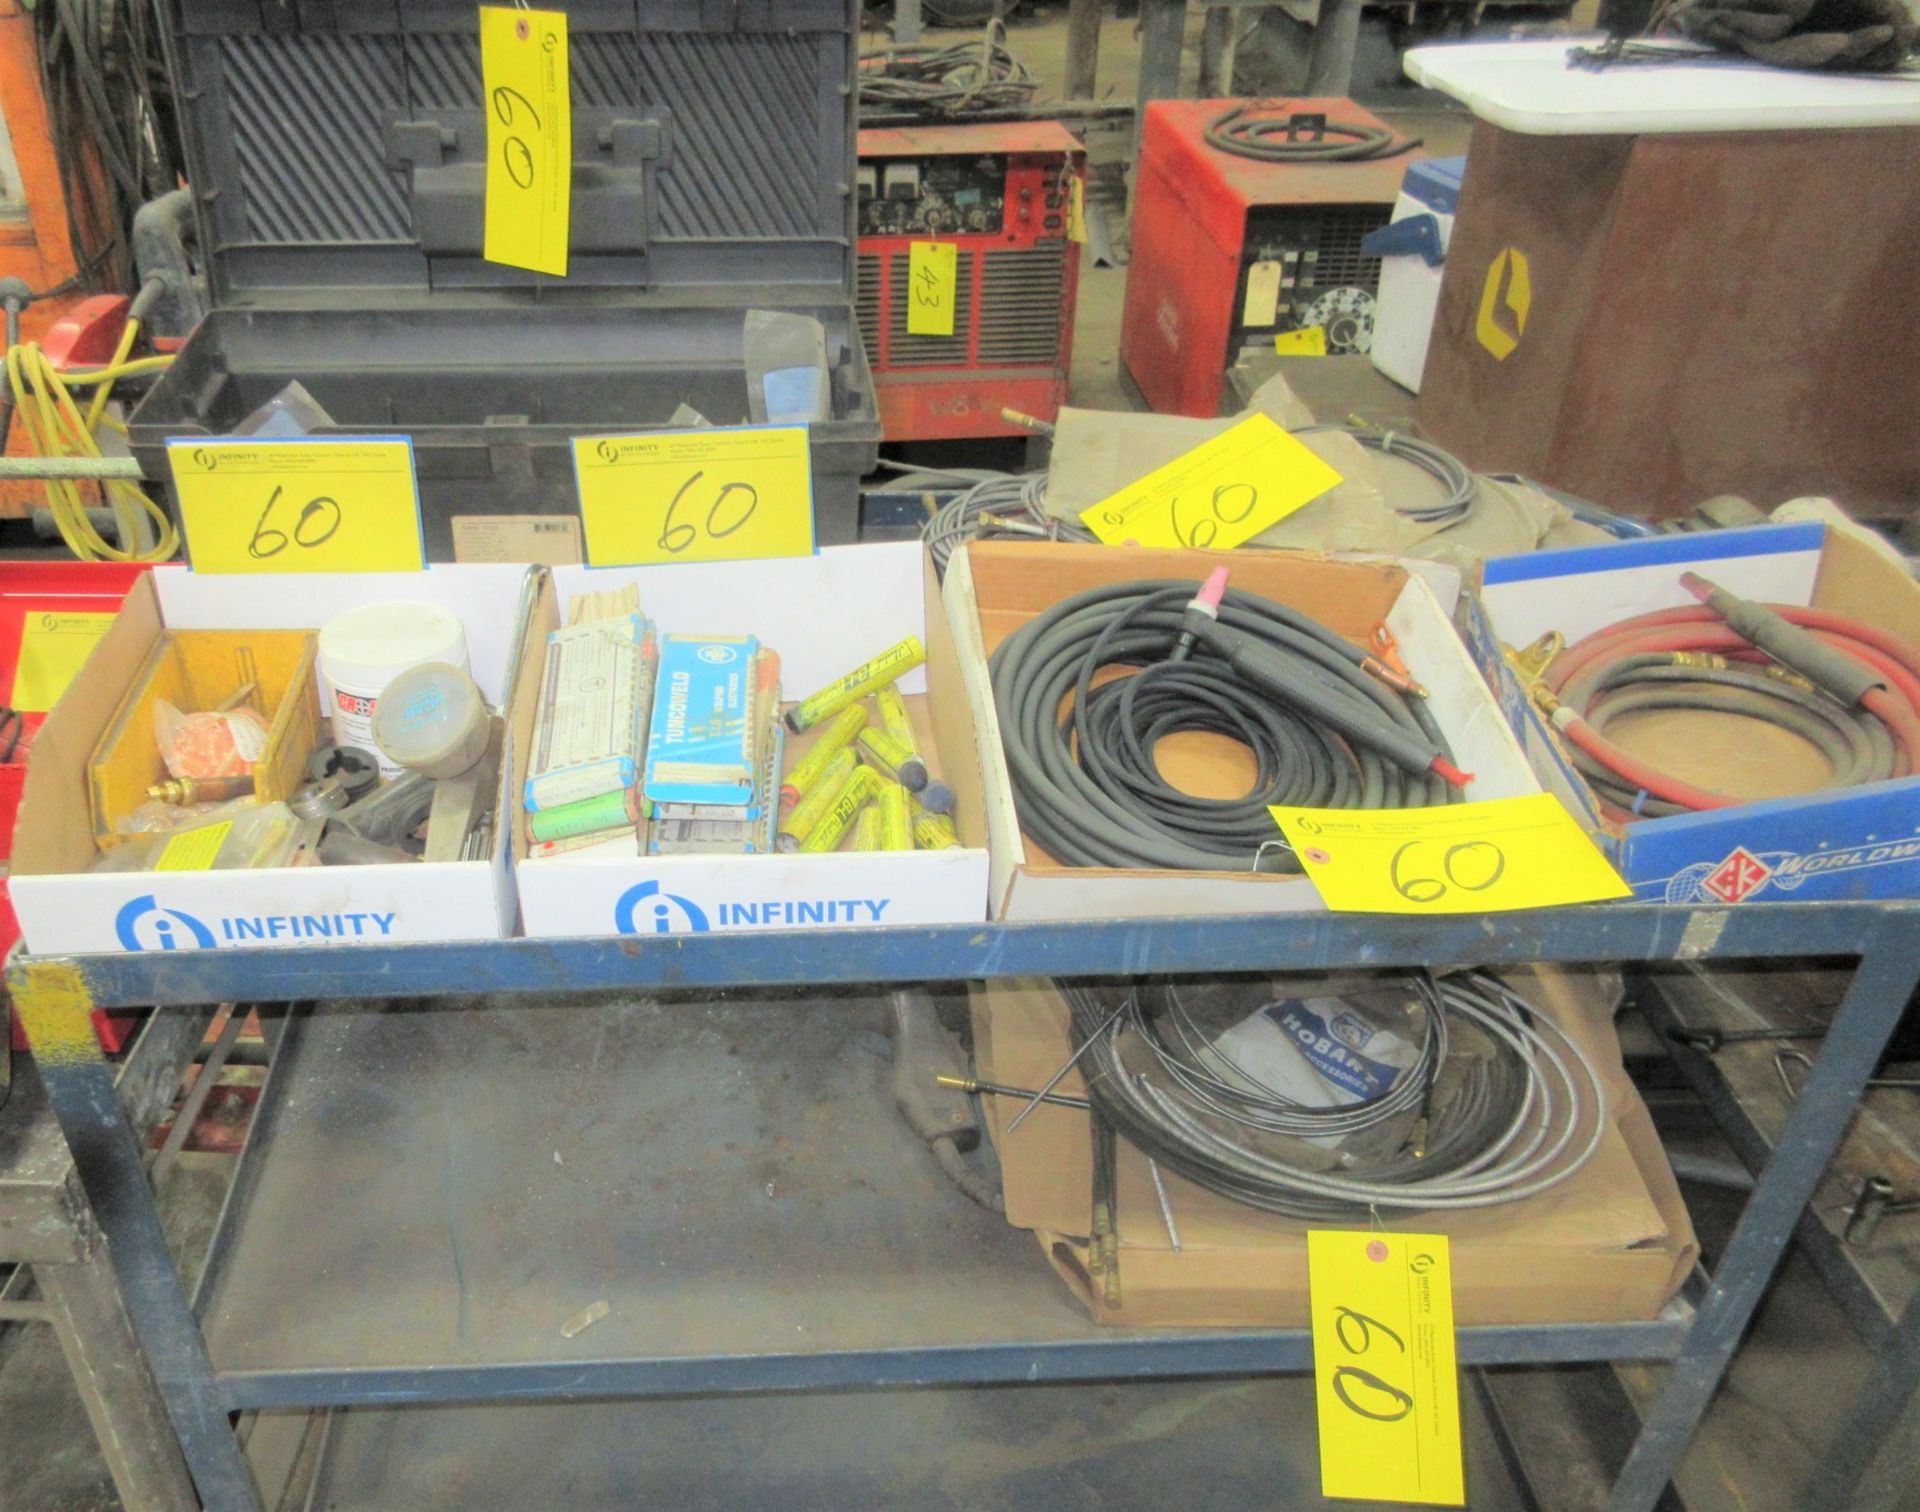 LOT OF WELDING SUPPLIES ON CART INCLUDING TUNCOWELD ELECTRODES, CABLES, TIPS, PARTS, ETC.